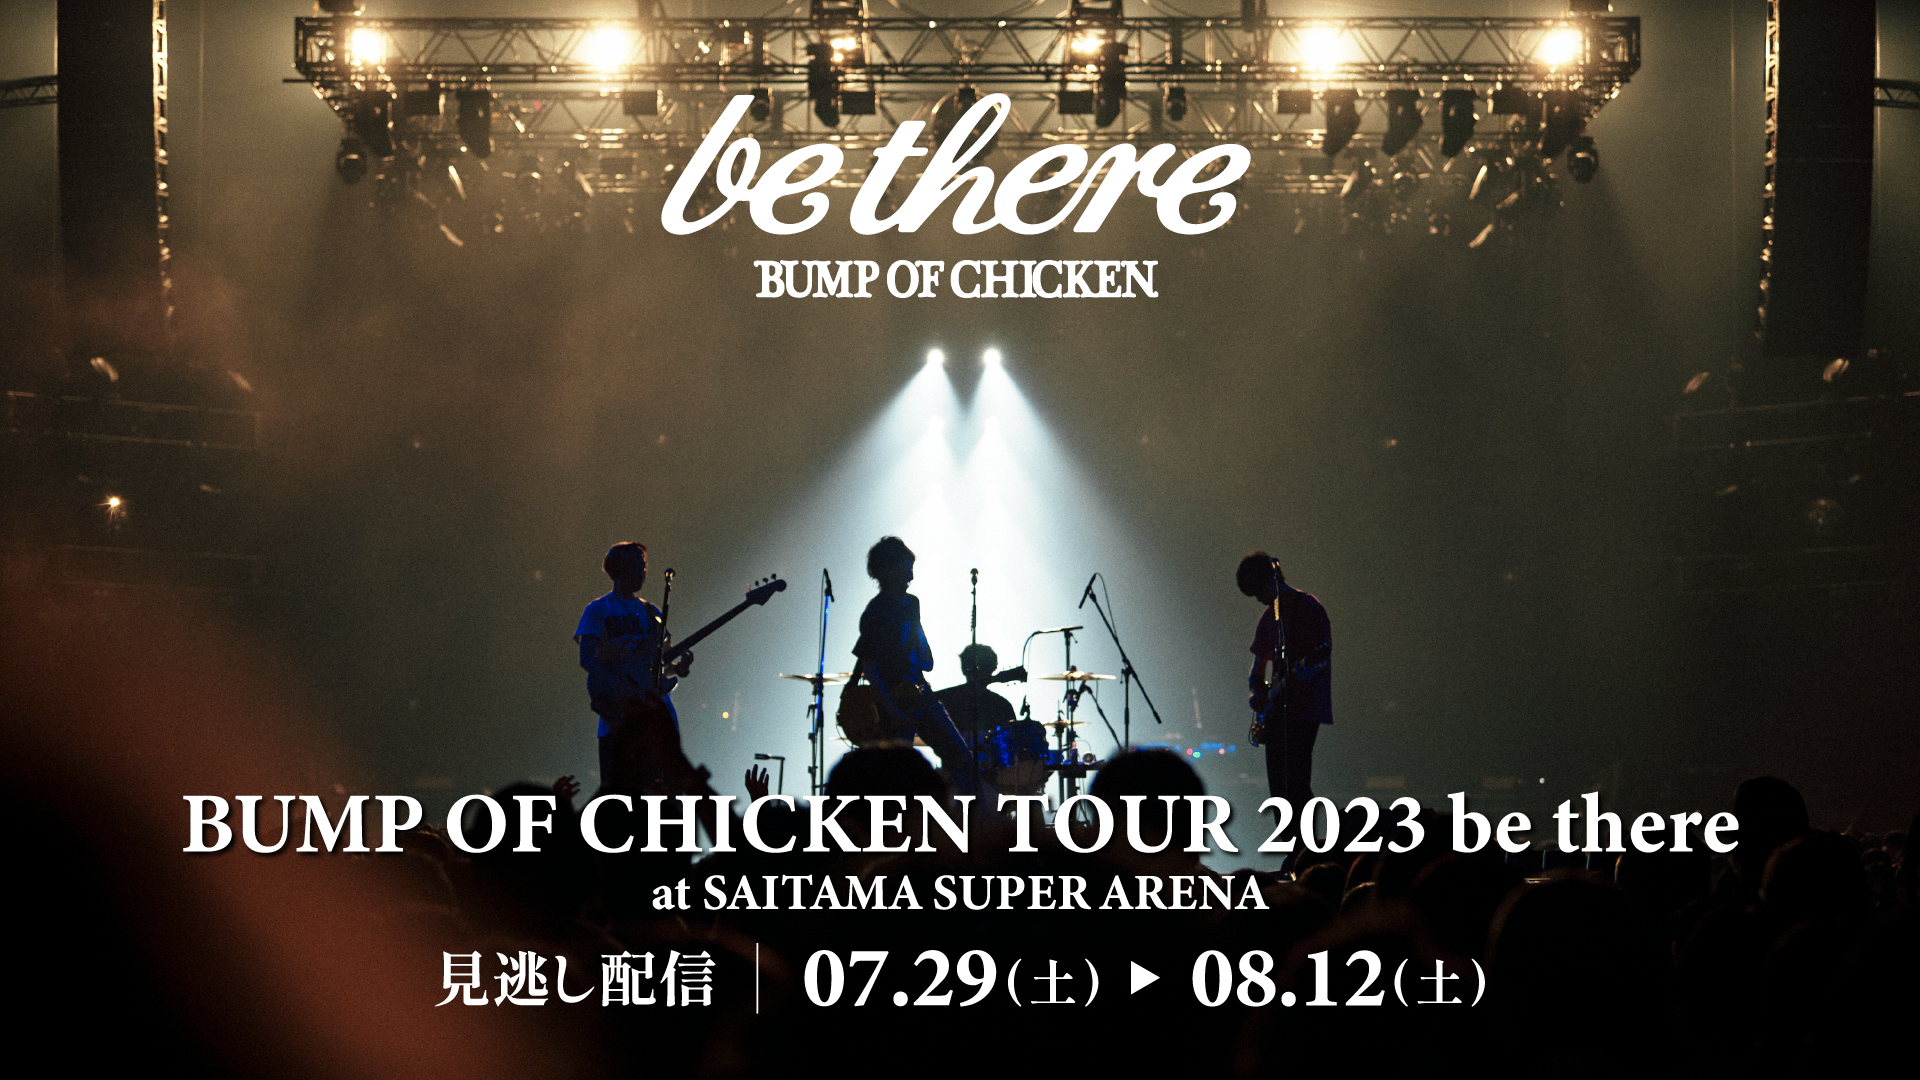 BUMP OF CHICKEN TOUR 2023 be there at SAITAMA SUPER ARENA